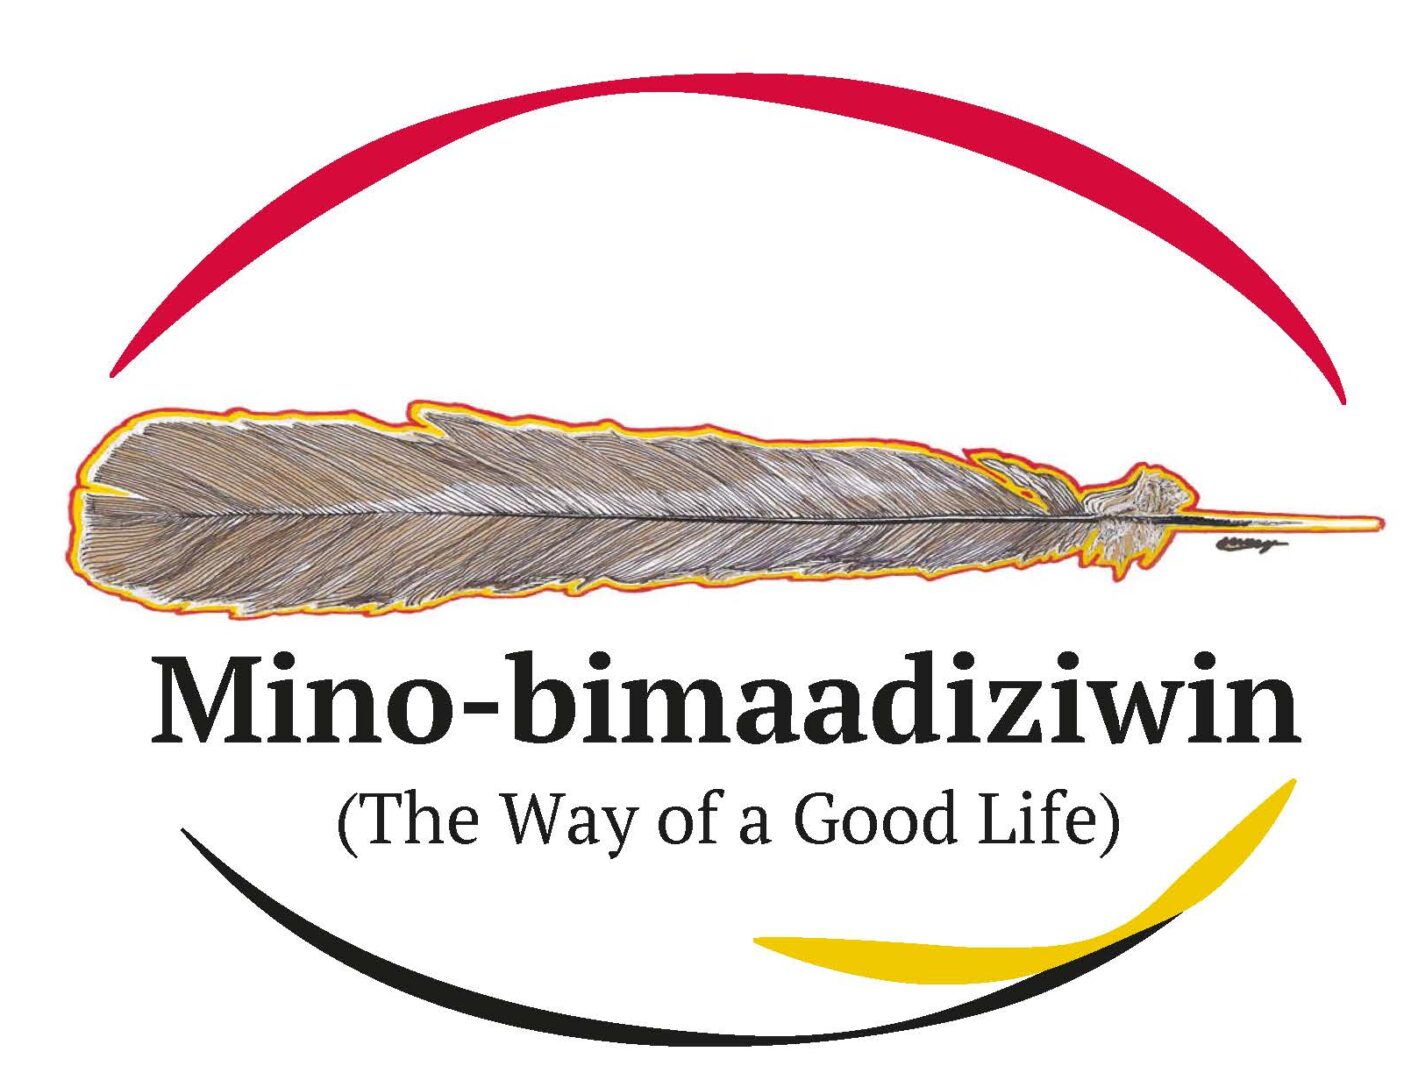 Logo with feather for Mino-bimaadiziwin - The Way of a good life.